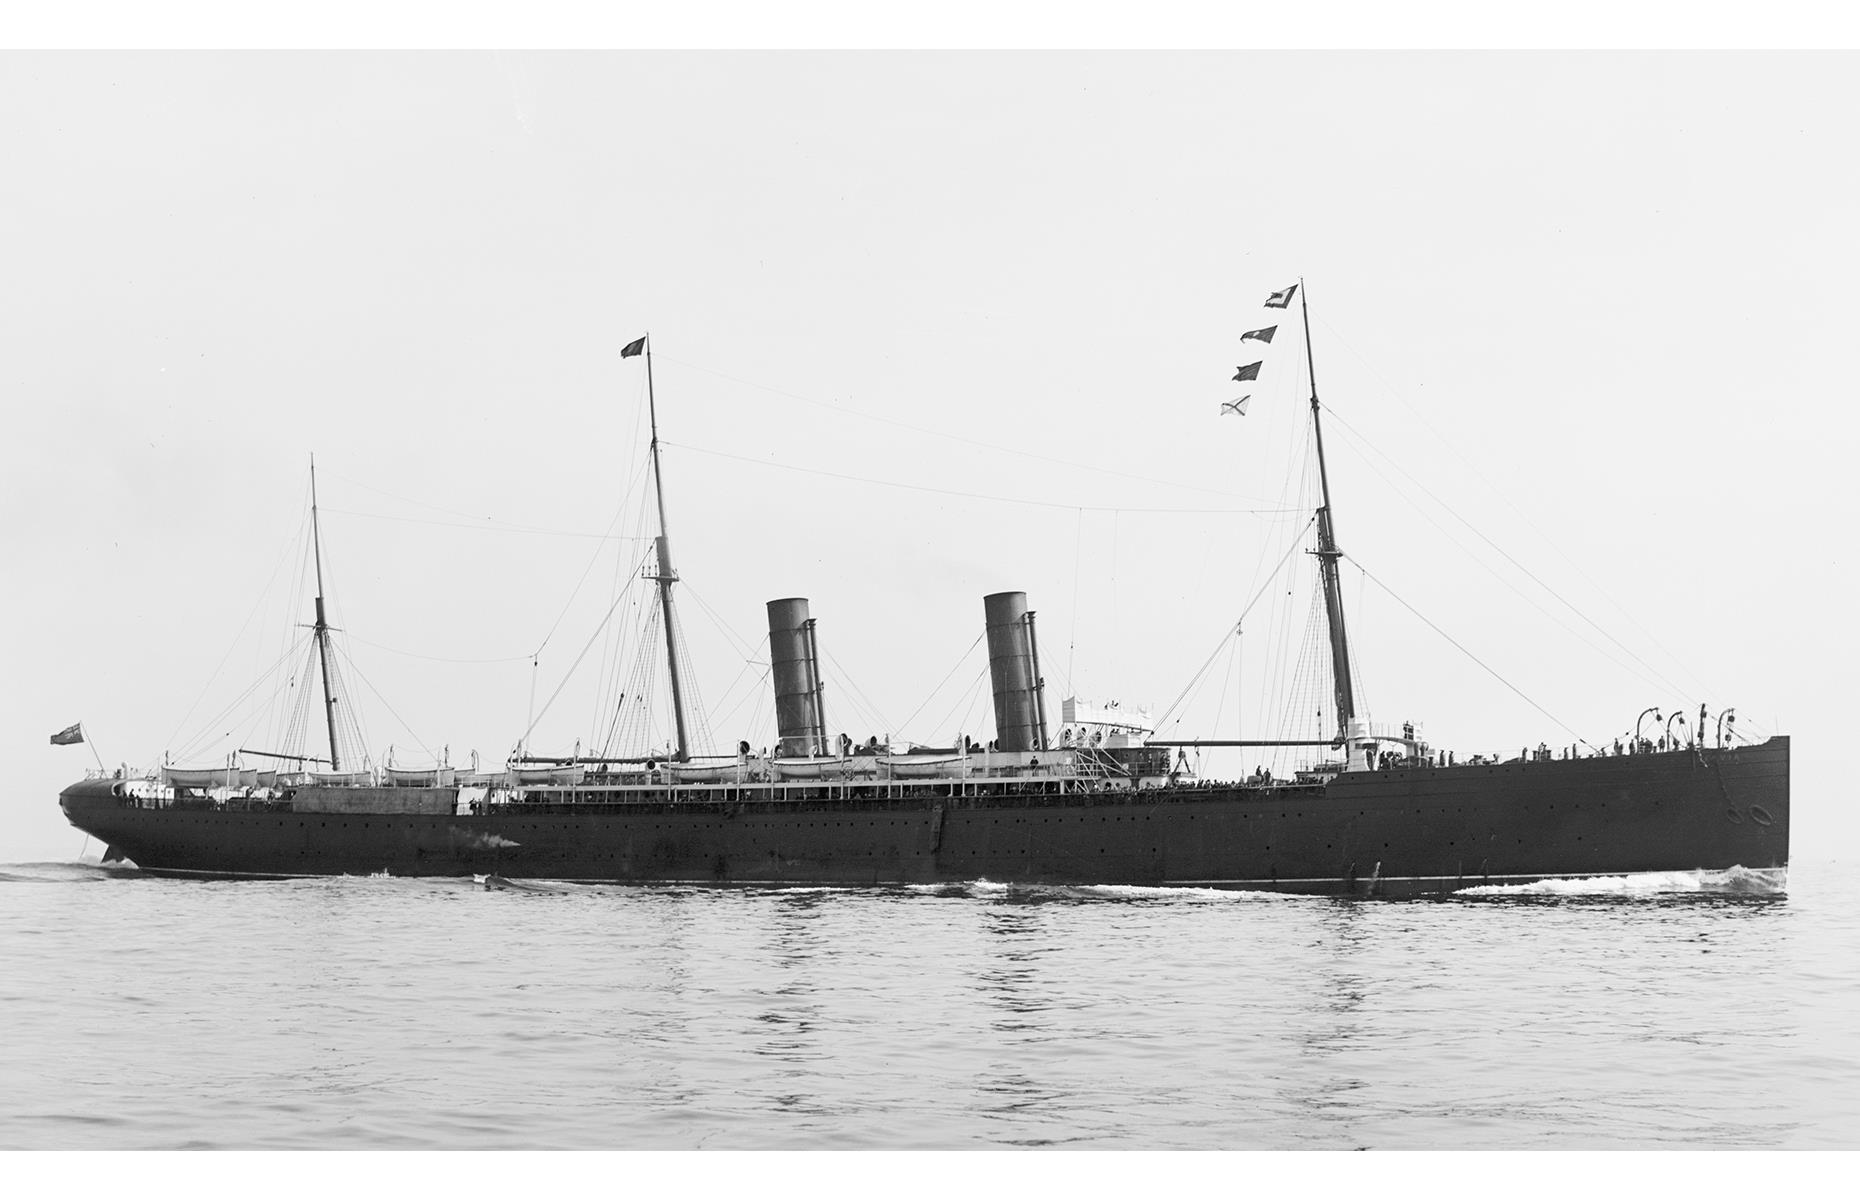 In the 1880s, now well-established names like Cunard and P&O continued to make waves. Launched in 1881, and pictured here in 1899, SS Servia was the first Cunard passenger ship to function with electric lighting. To many, she represents an early model of today's modern liners.